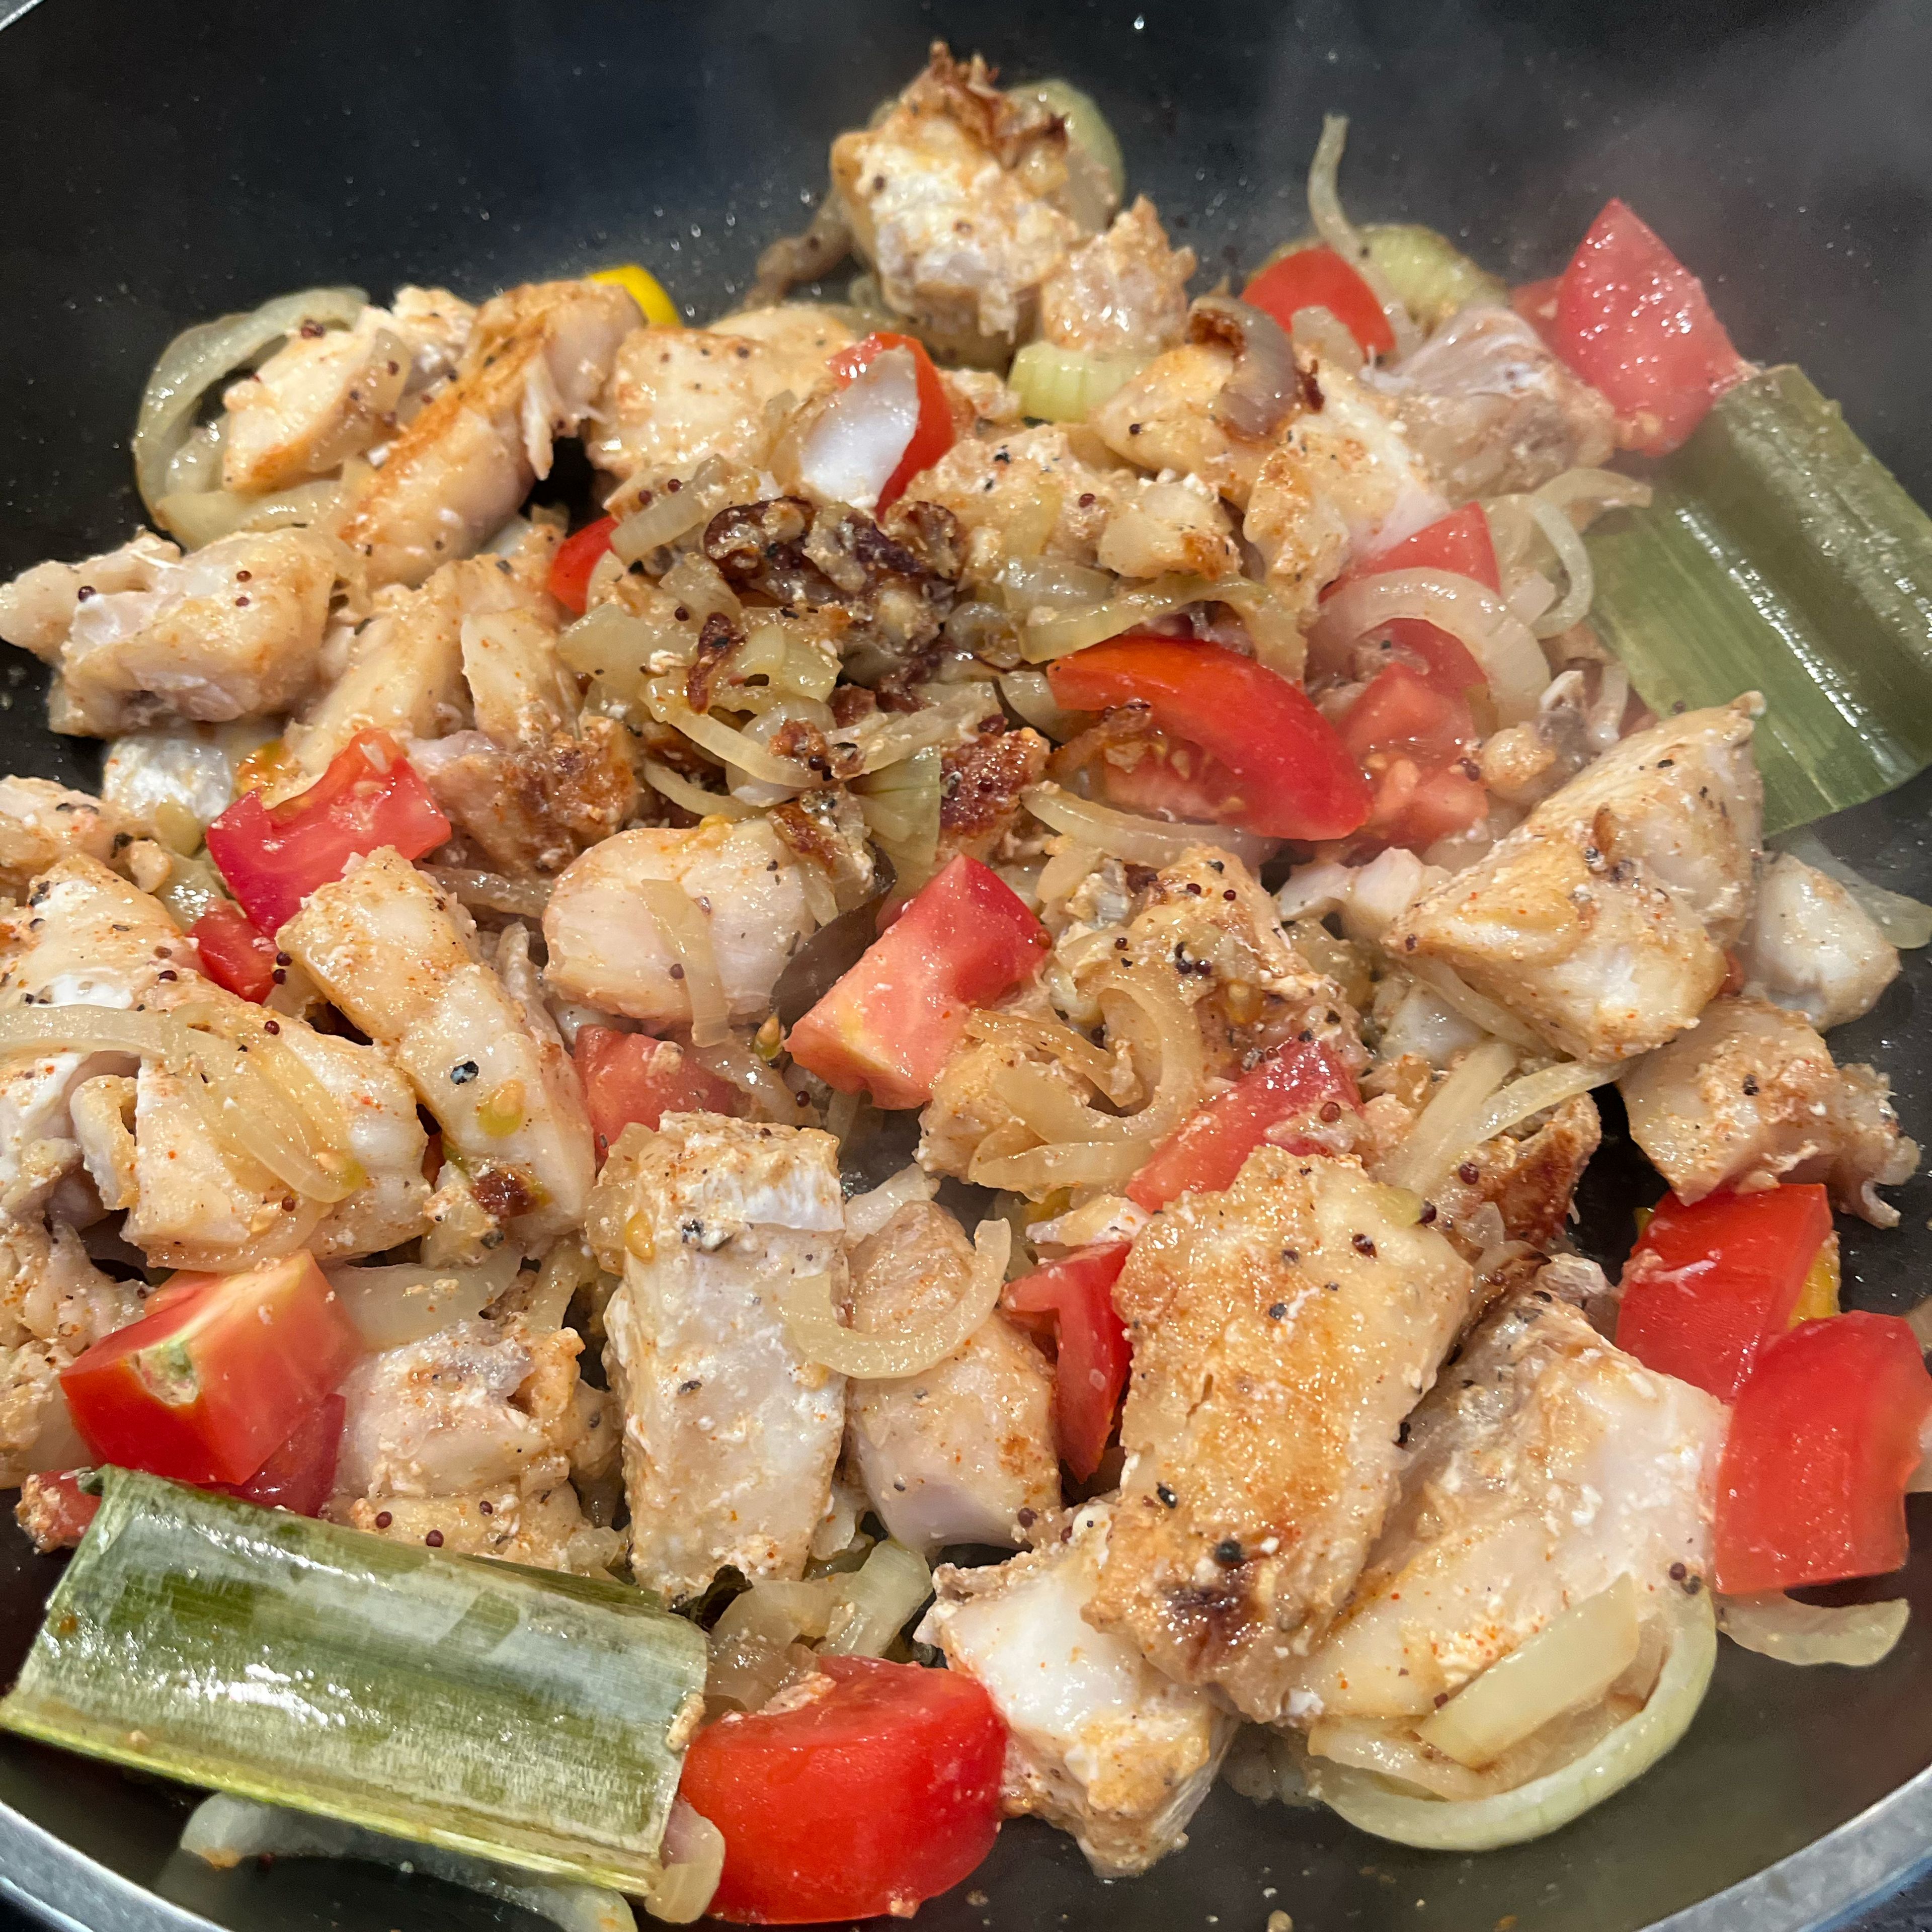 When bottom of the fish starts to brown, turn fish and mix with onions, add tomatoes at the end. Sauté for another 2min and remove from heat. Serve with rice, parippu and a vegetable dish, e.g. swiss chard.